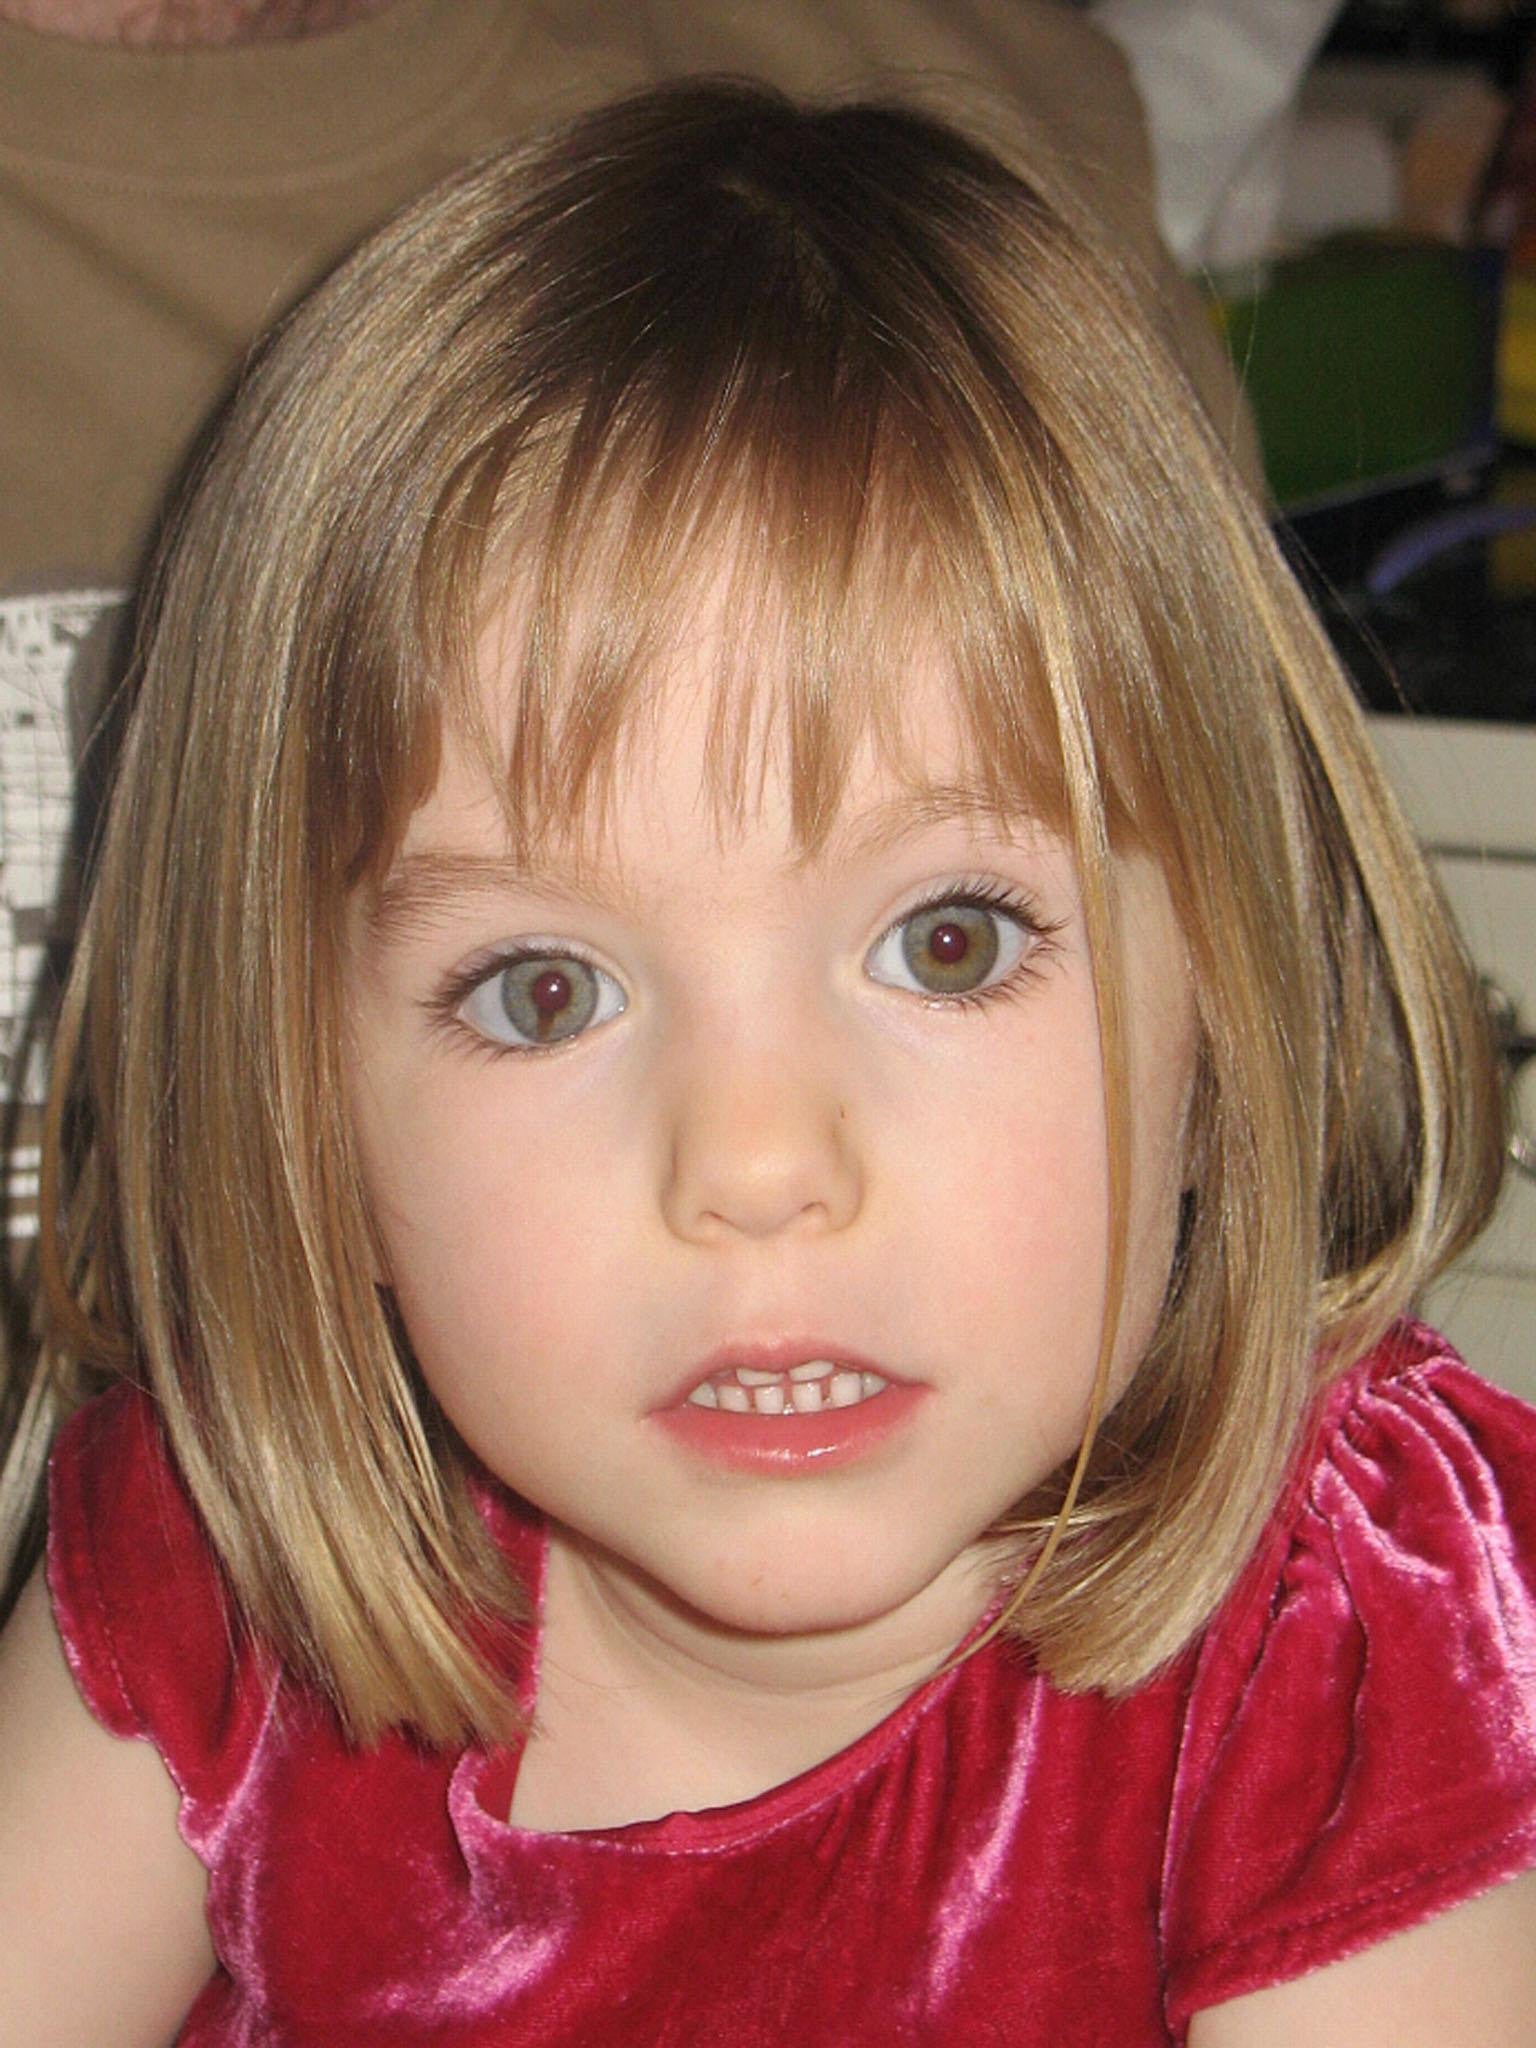 Madeleine McCann whose parents, Kate and Gerry McCann, have said they welcome the news that Portuguese authorities have declared a German man a formal suspect in her disappearance (PA)